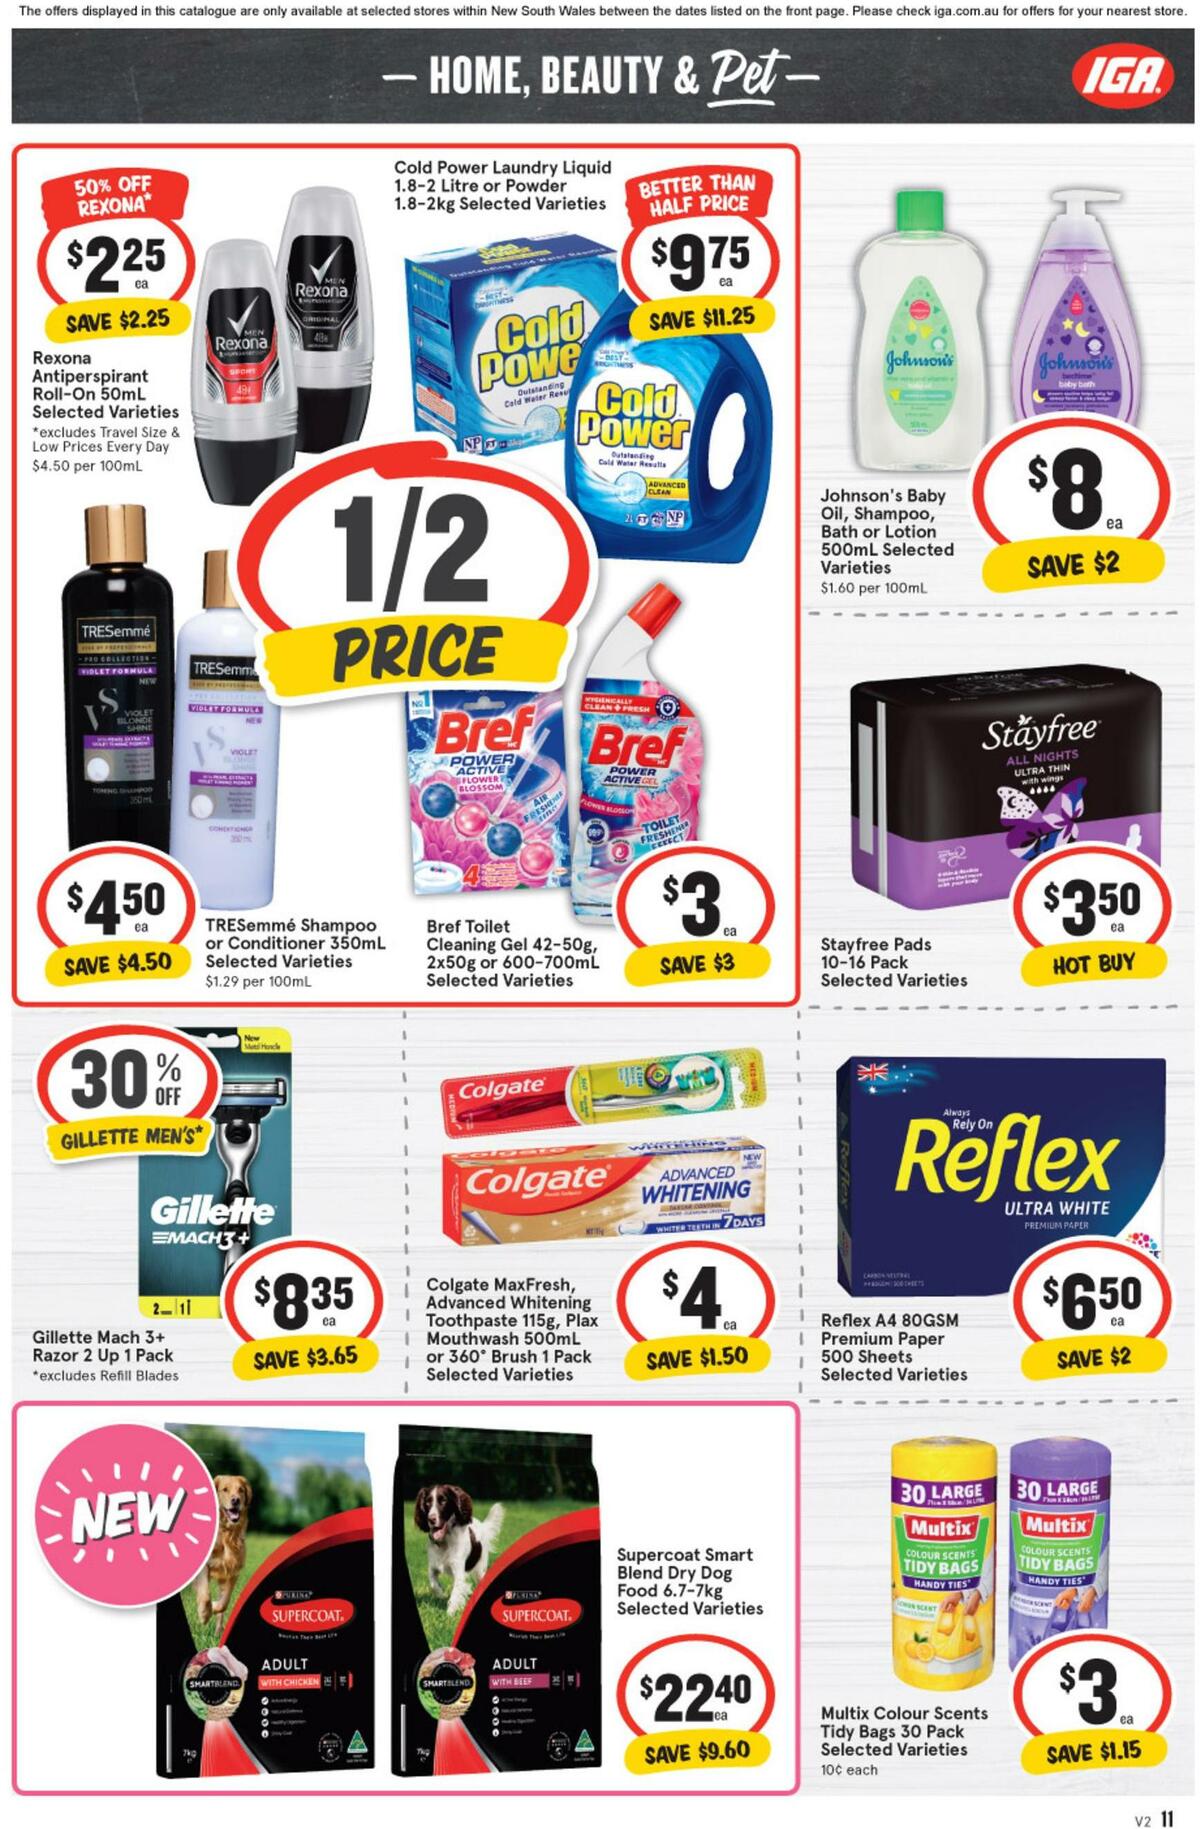 IGA Catalogues from 5 October